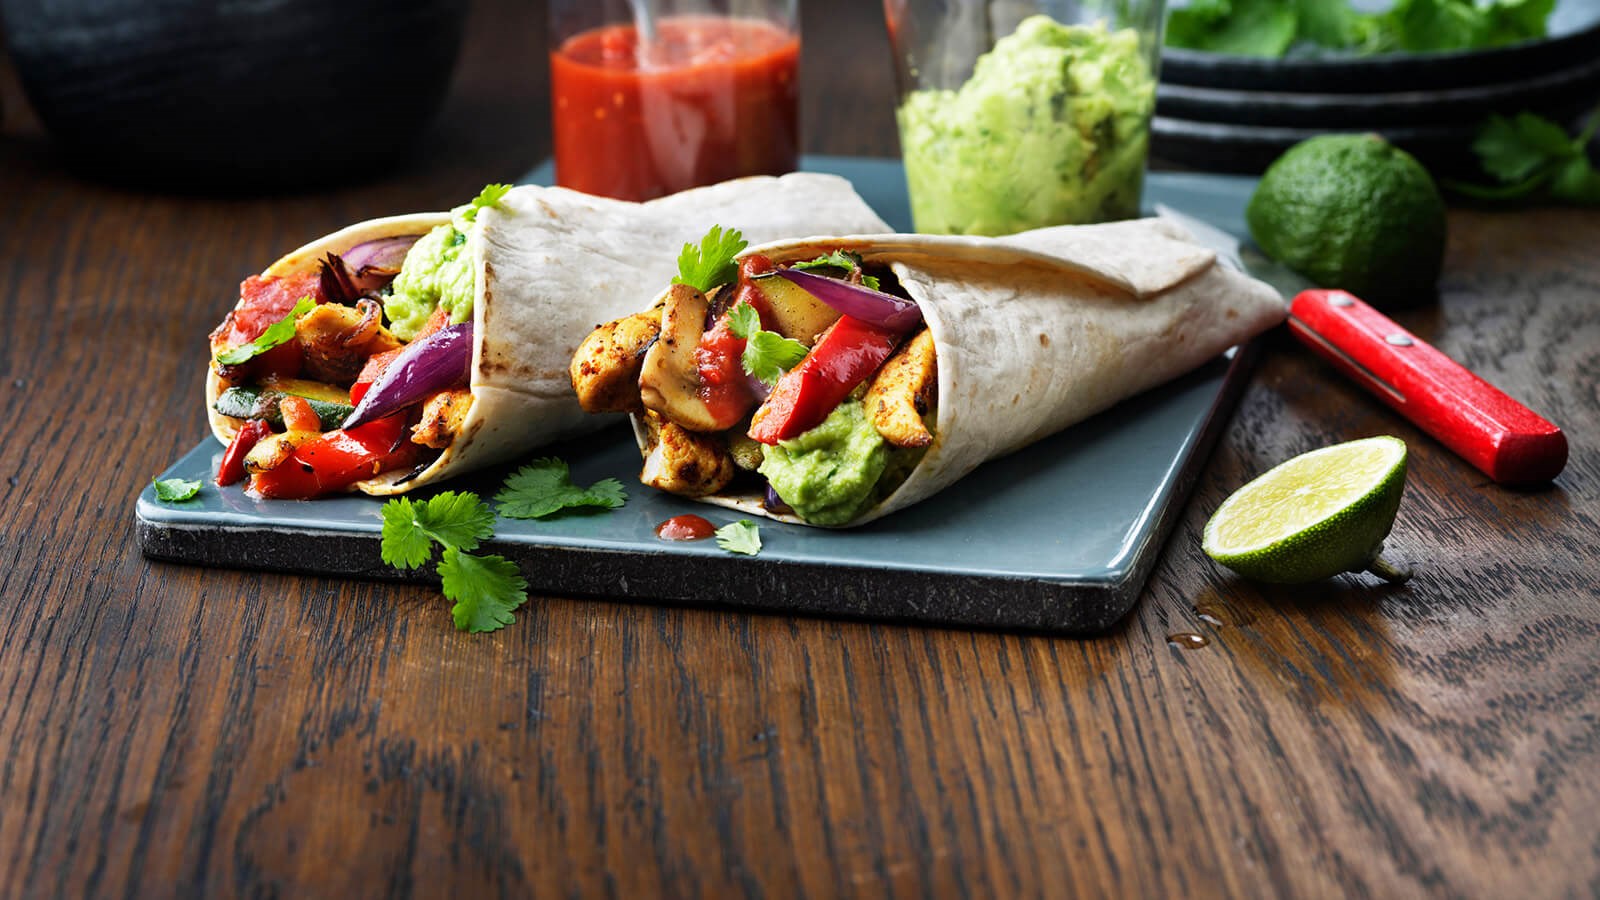 Fajita wraps with chicken and lots of vegetables